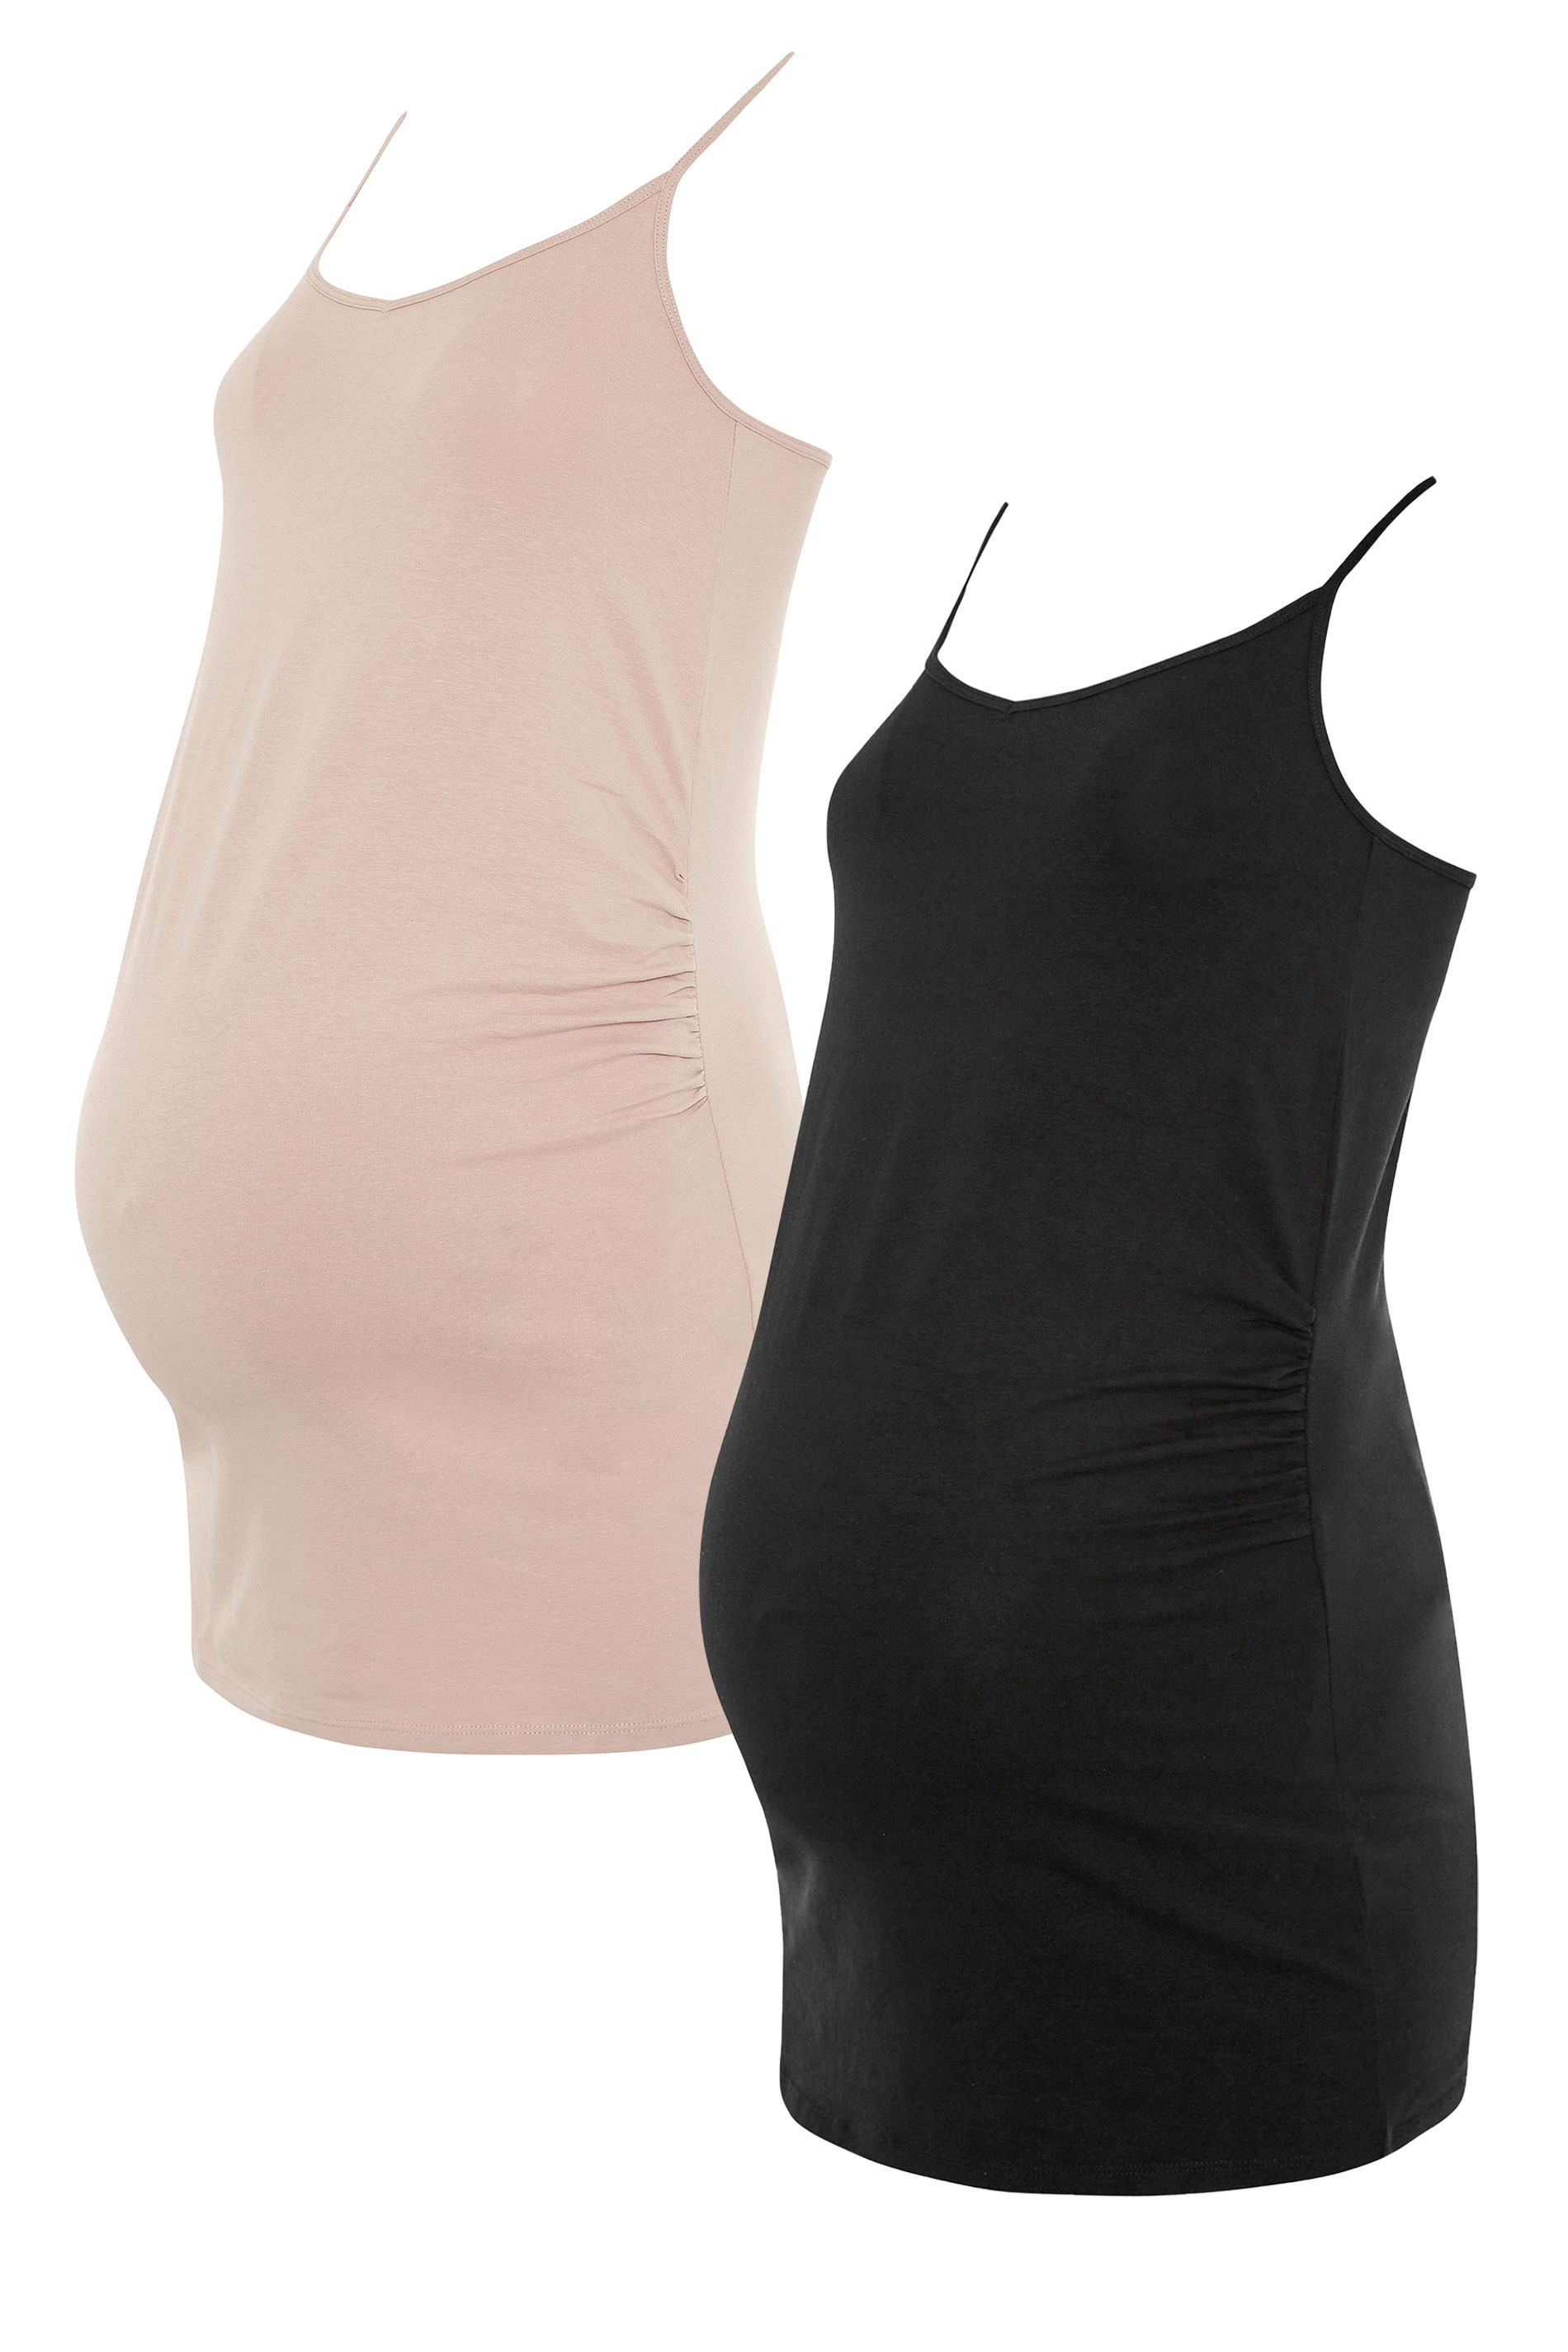 Tall Women's LTS 2 Pack Maternity Black & Nude Cami Vest Tops | Long Tall Sally 2